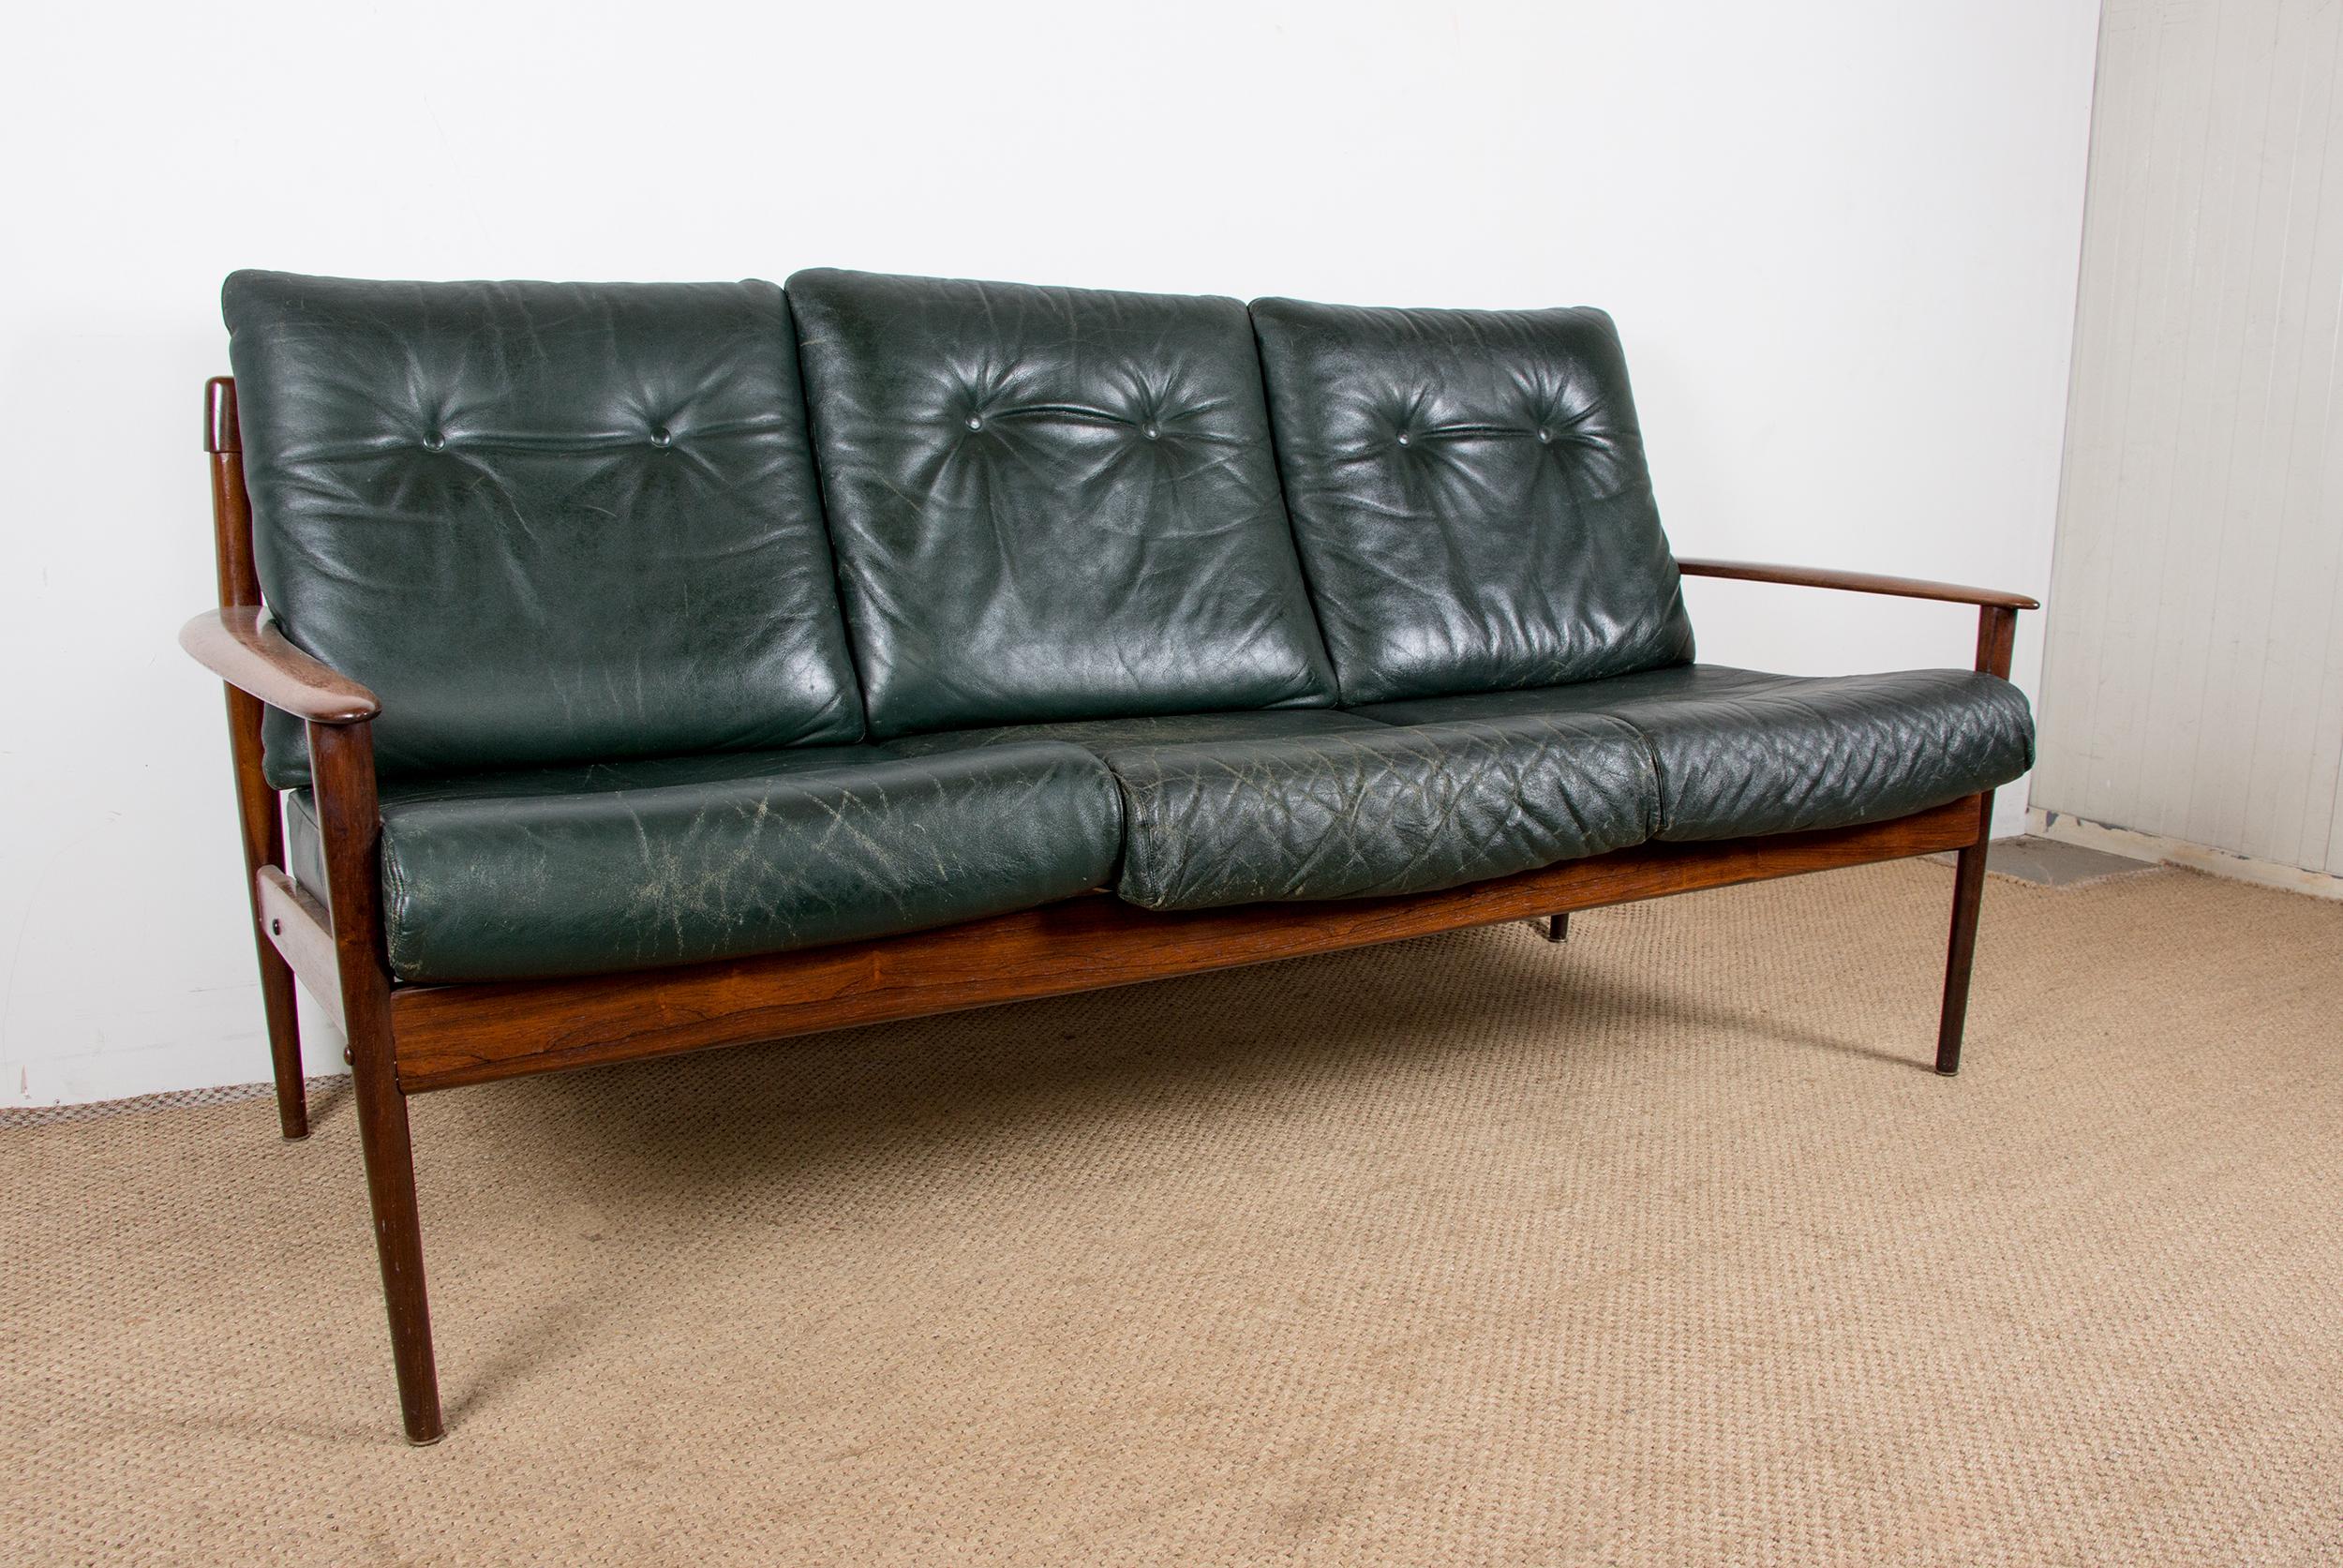 Superb Scandinavian sofa. Frame entirely in solid Rosewood, seat structure in redone rubber tape. Very elegant design, very good manufacturing quality. The seat and back cushions can be redone in the fabric or leather of your choice.